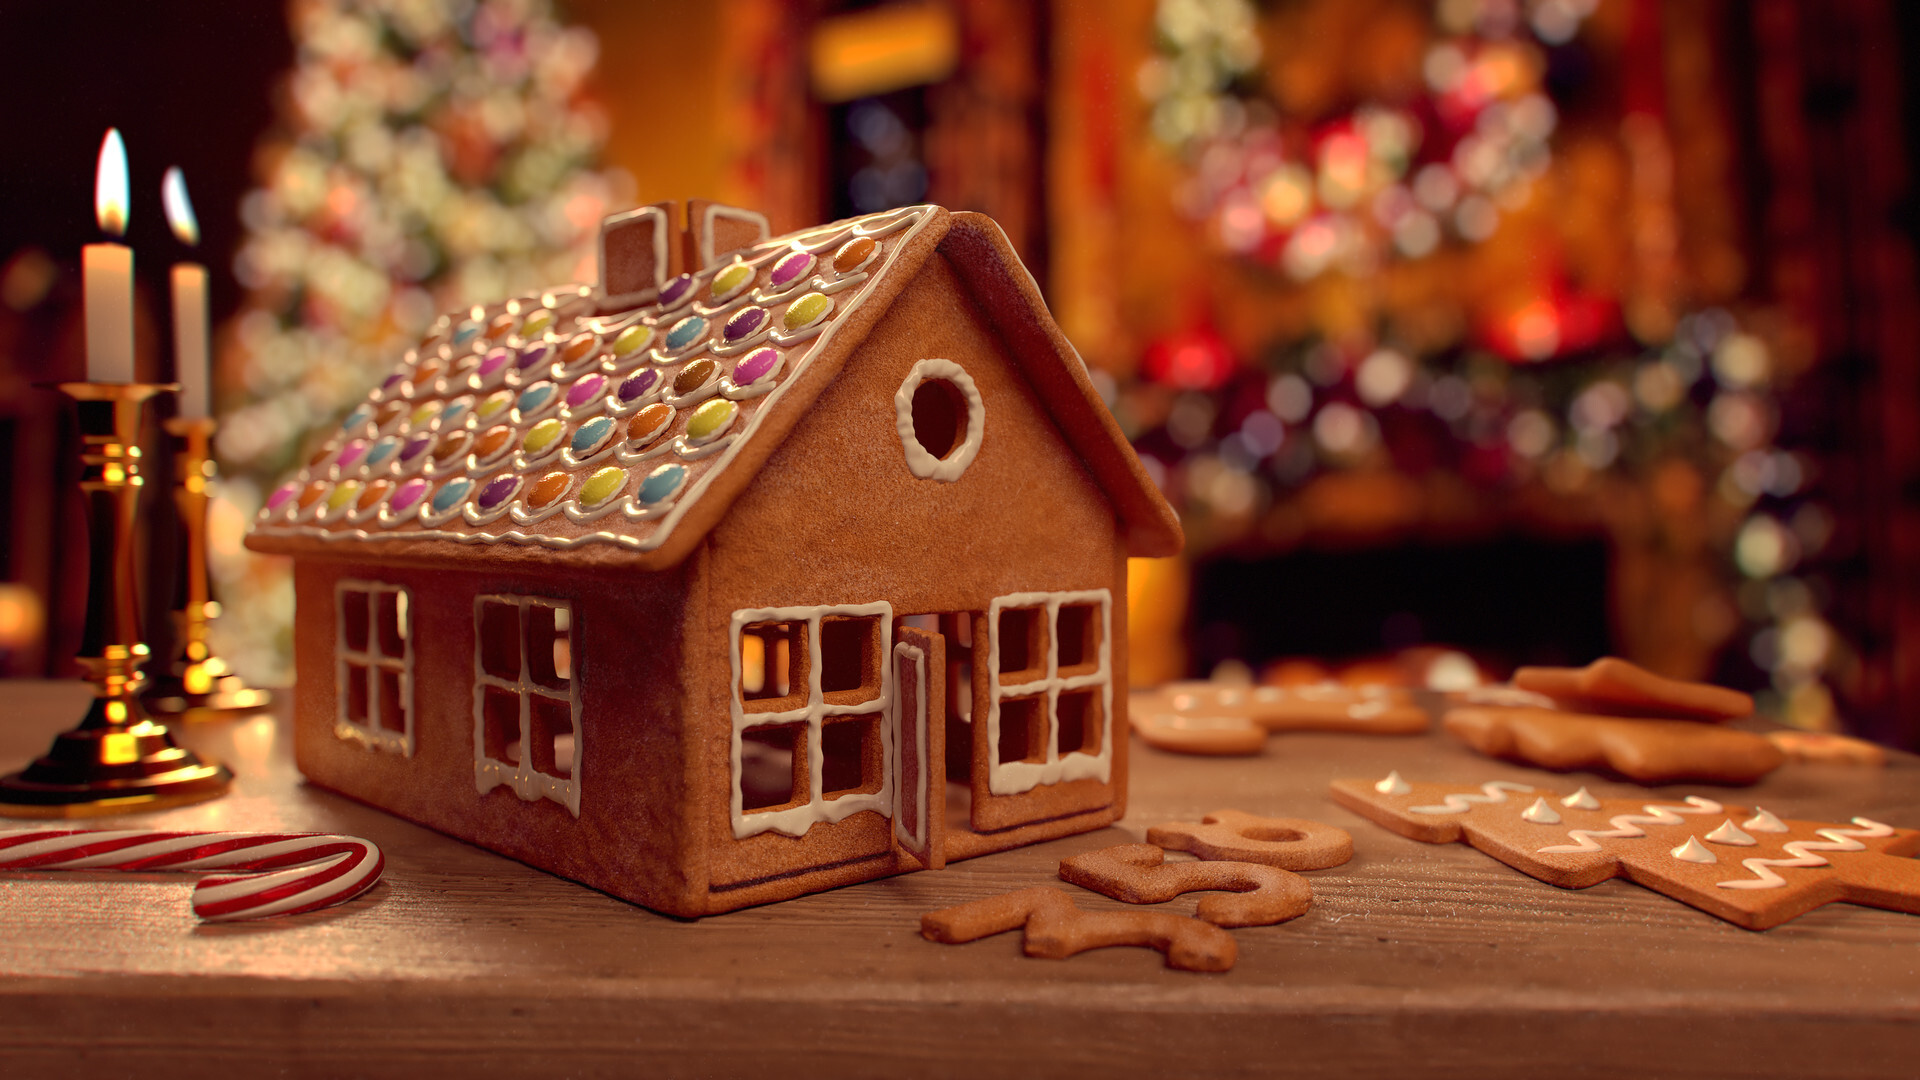 Gingerbread house 3D, Artistic creation, Immersive experience, Culinary craftsmanship, 1920x1080 Full HD Desktop